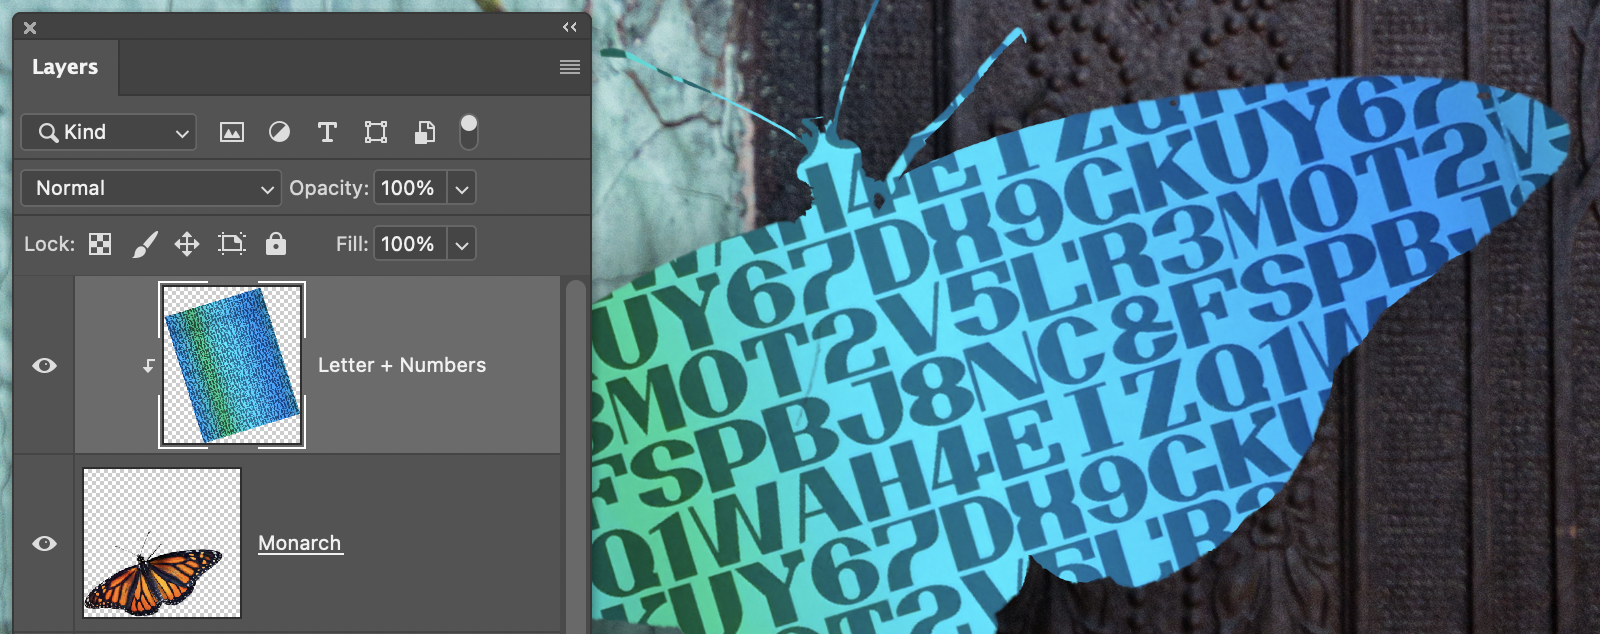 A raster-based image is added as a Clipping Mask.